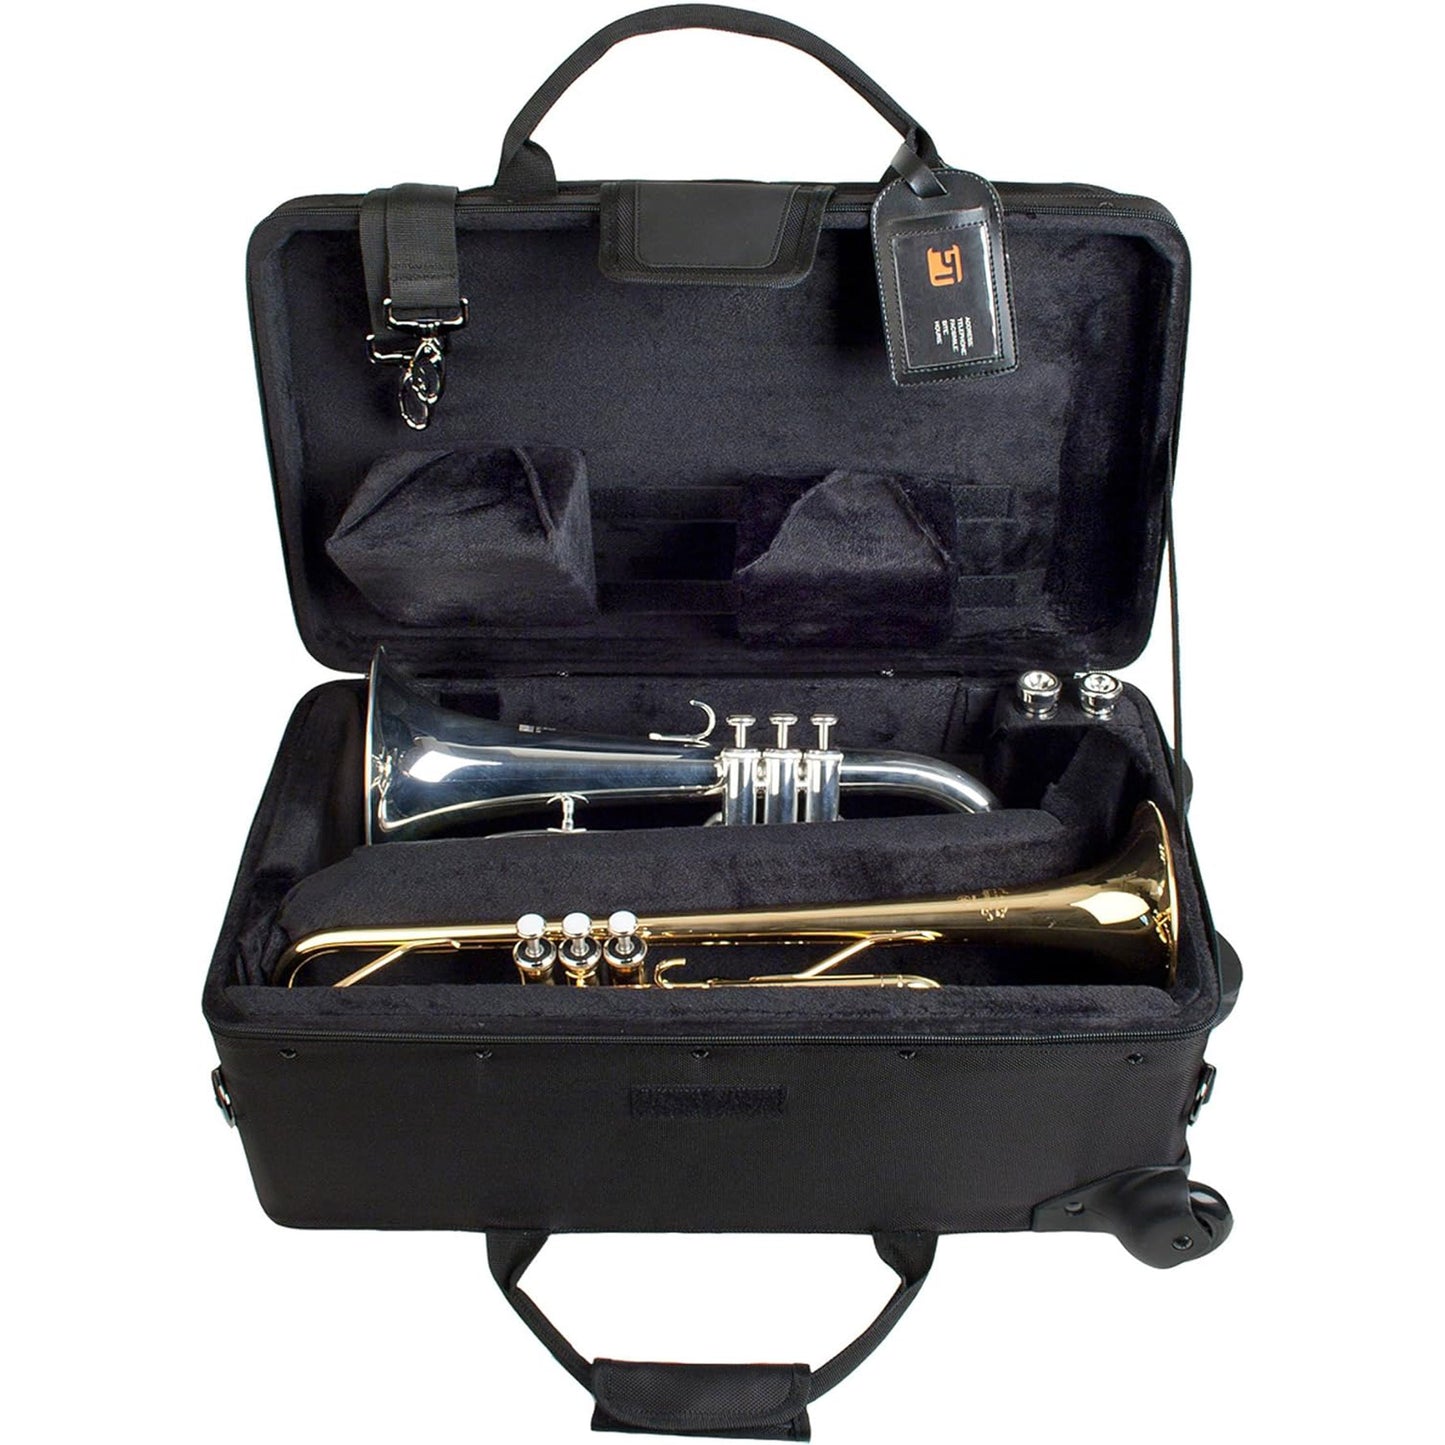 Protec PB301VAX Trumpet/Auxiliary Combo PRO PAC Case with Wheels - Black